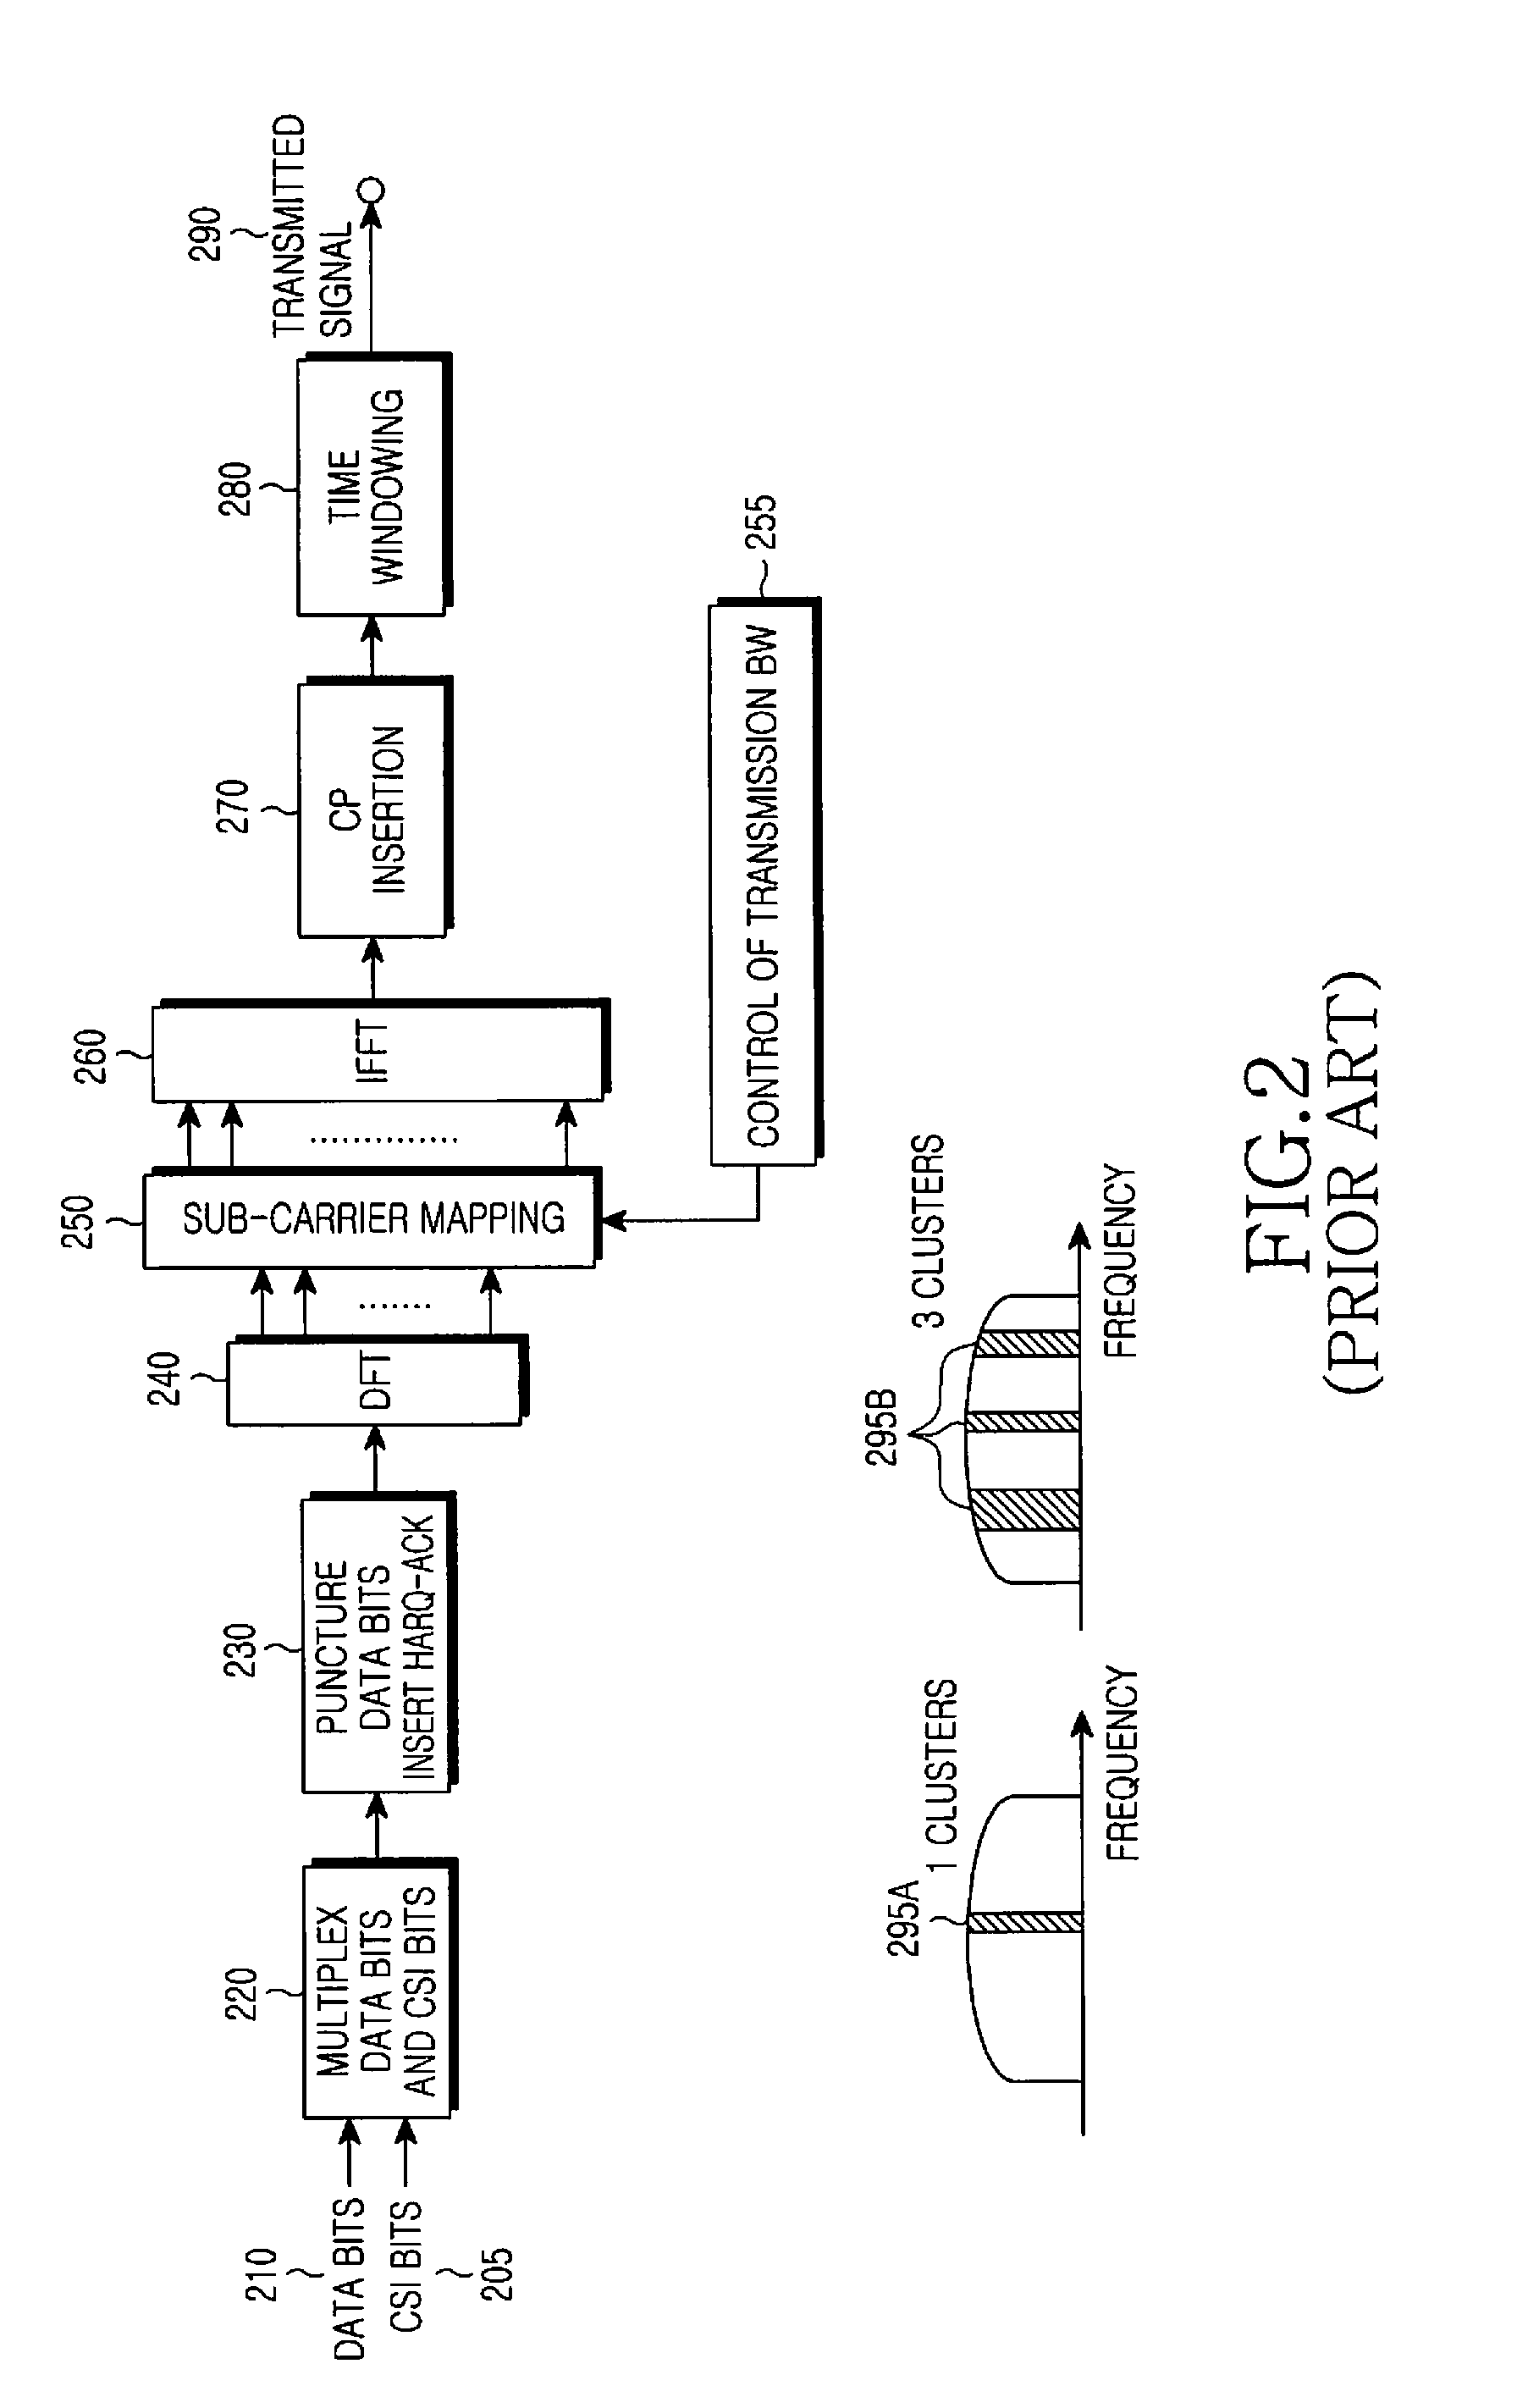 Multiplexing control and data information from a user equipment in a physical data channel